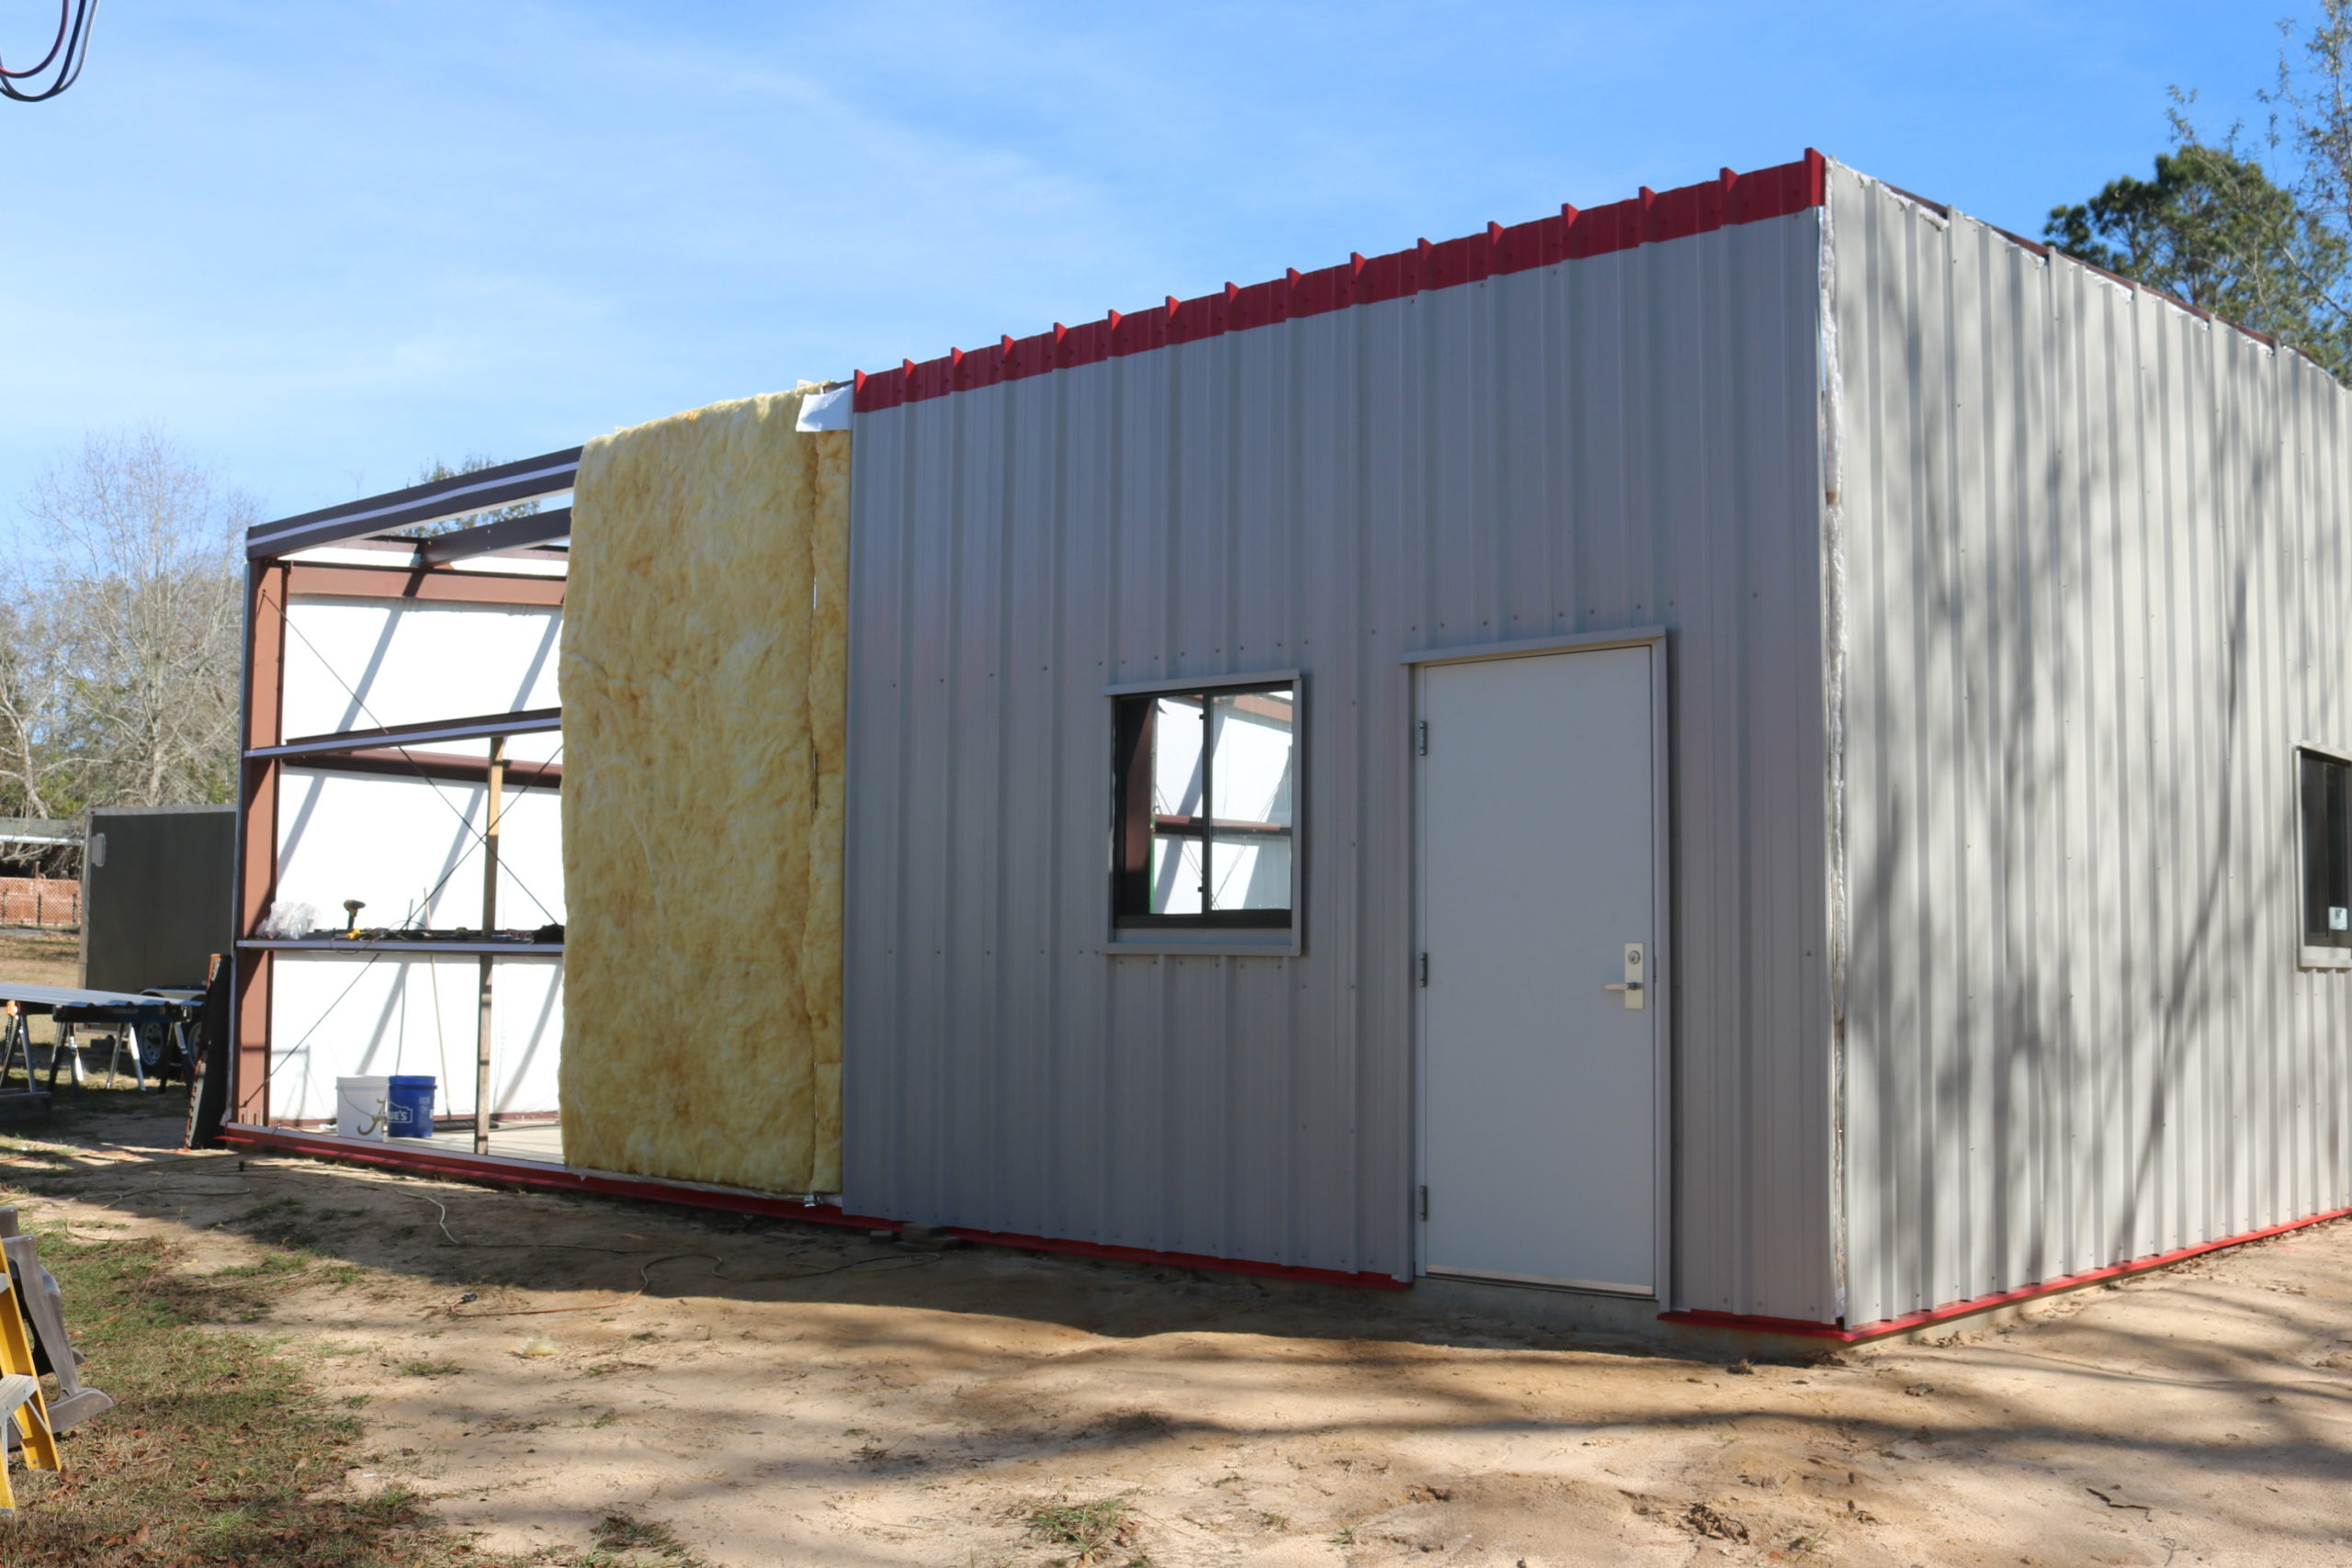 grandcentr 61f00dcd13107291971643125725 scaled - To insulate, or not insulate your prefabricated metal building